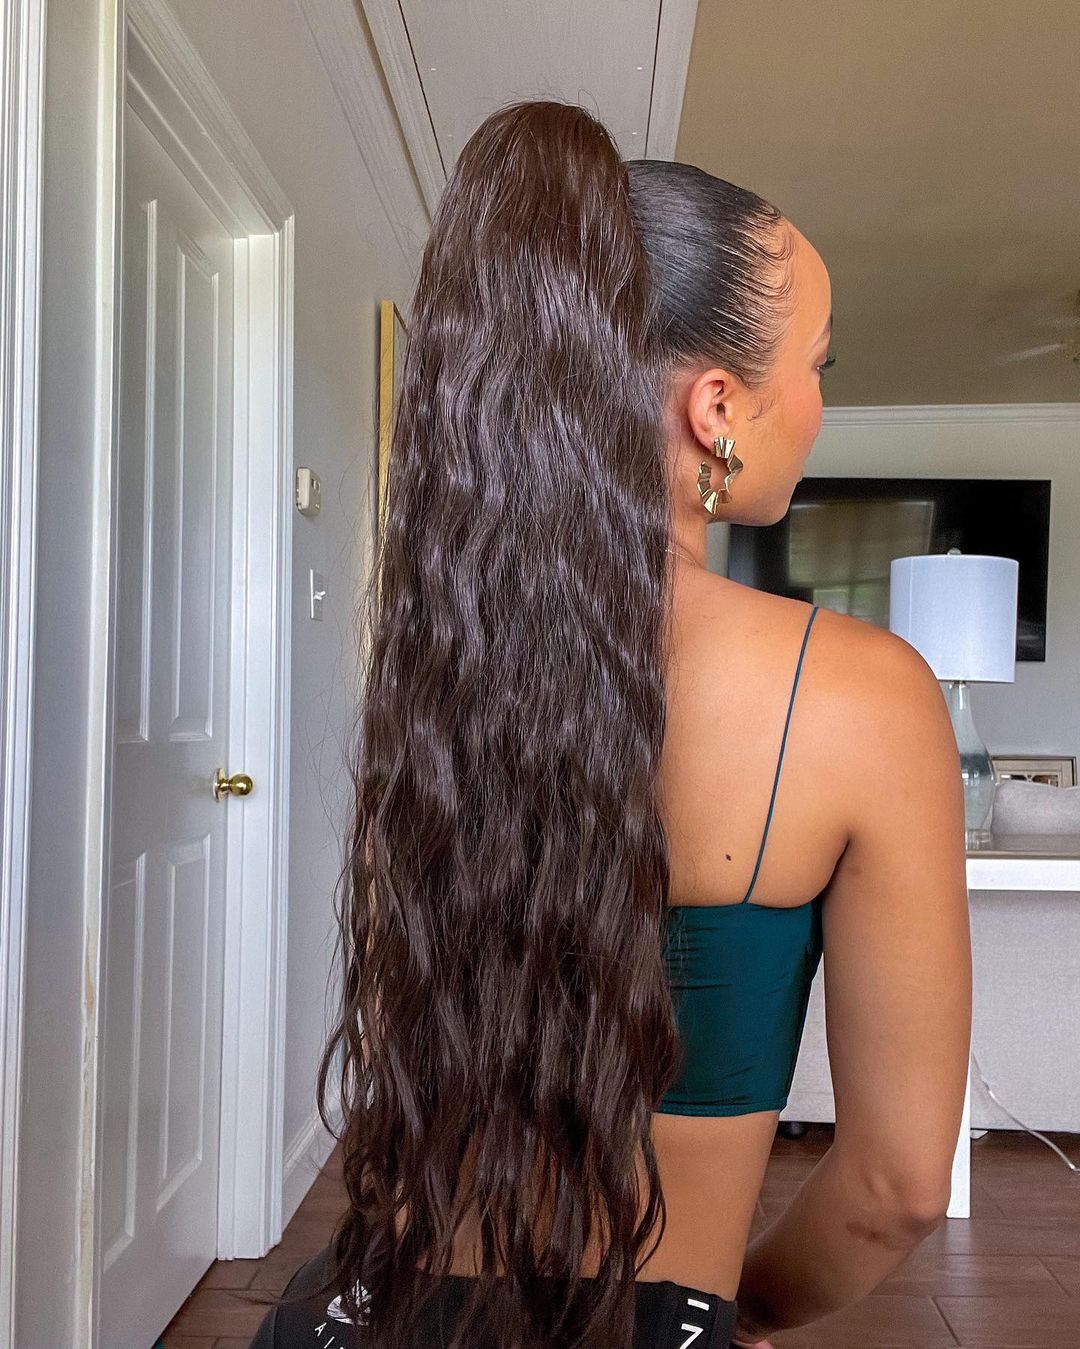 Best Weave Ponytail for Black Hair in 2020 | Weave Ponytail ... | High  ponytail hairstyles, Weave ponytail hairstyles, Black ponytail hairstyles